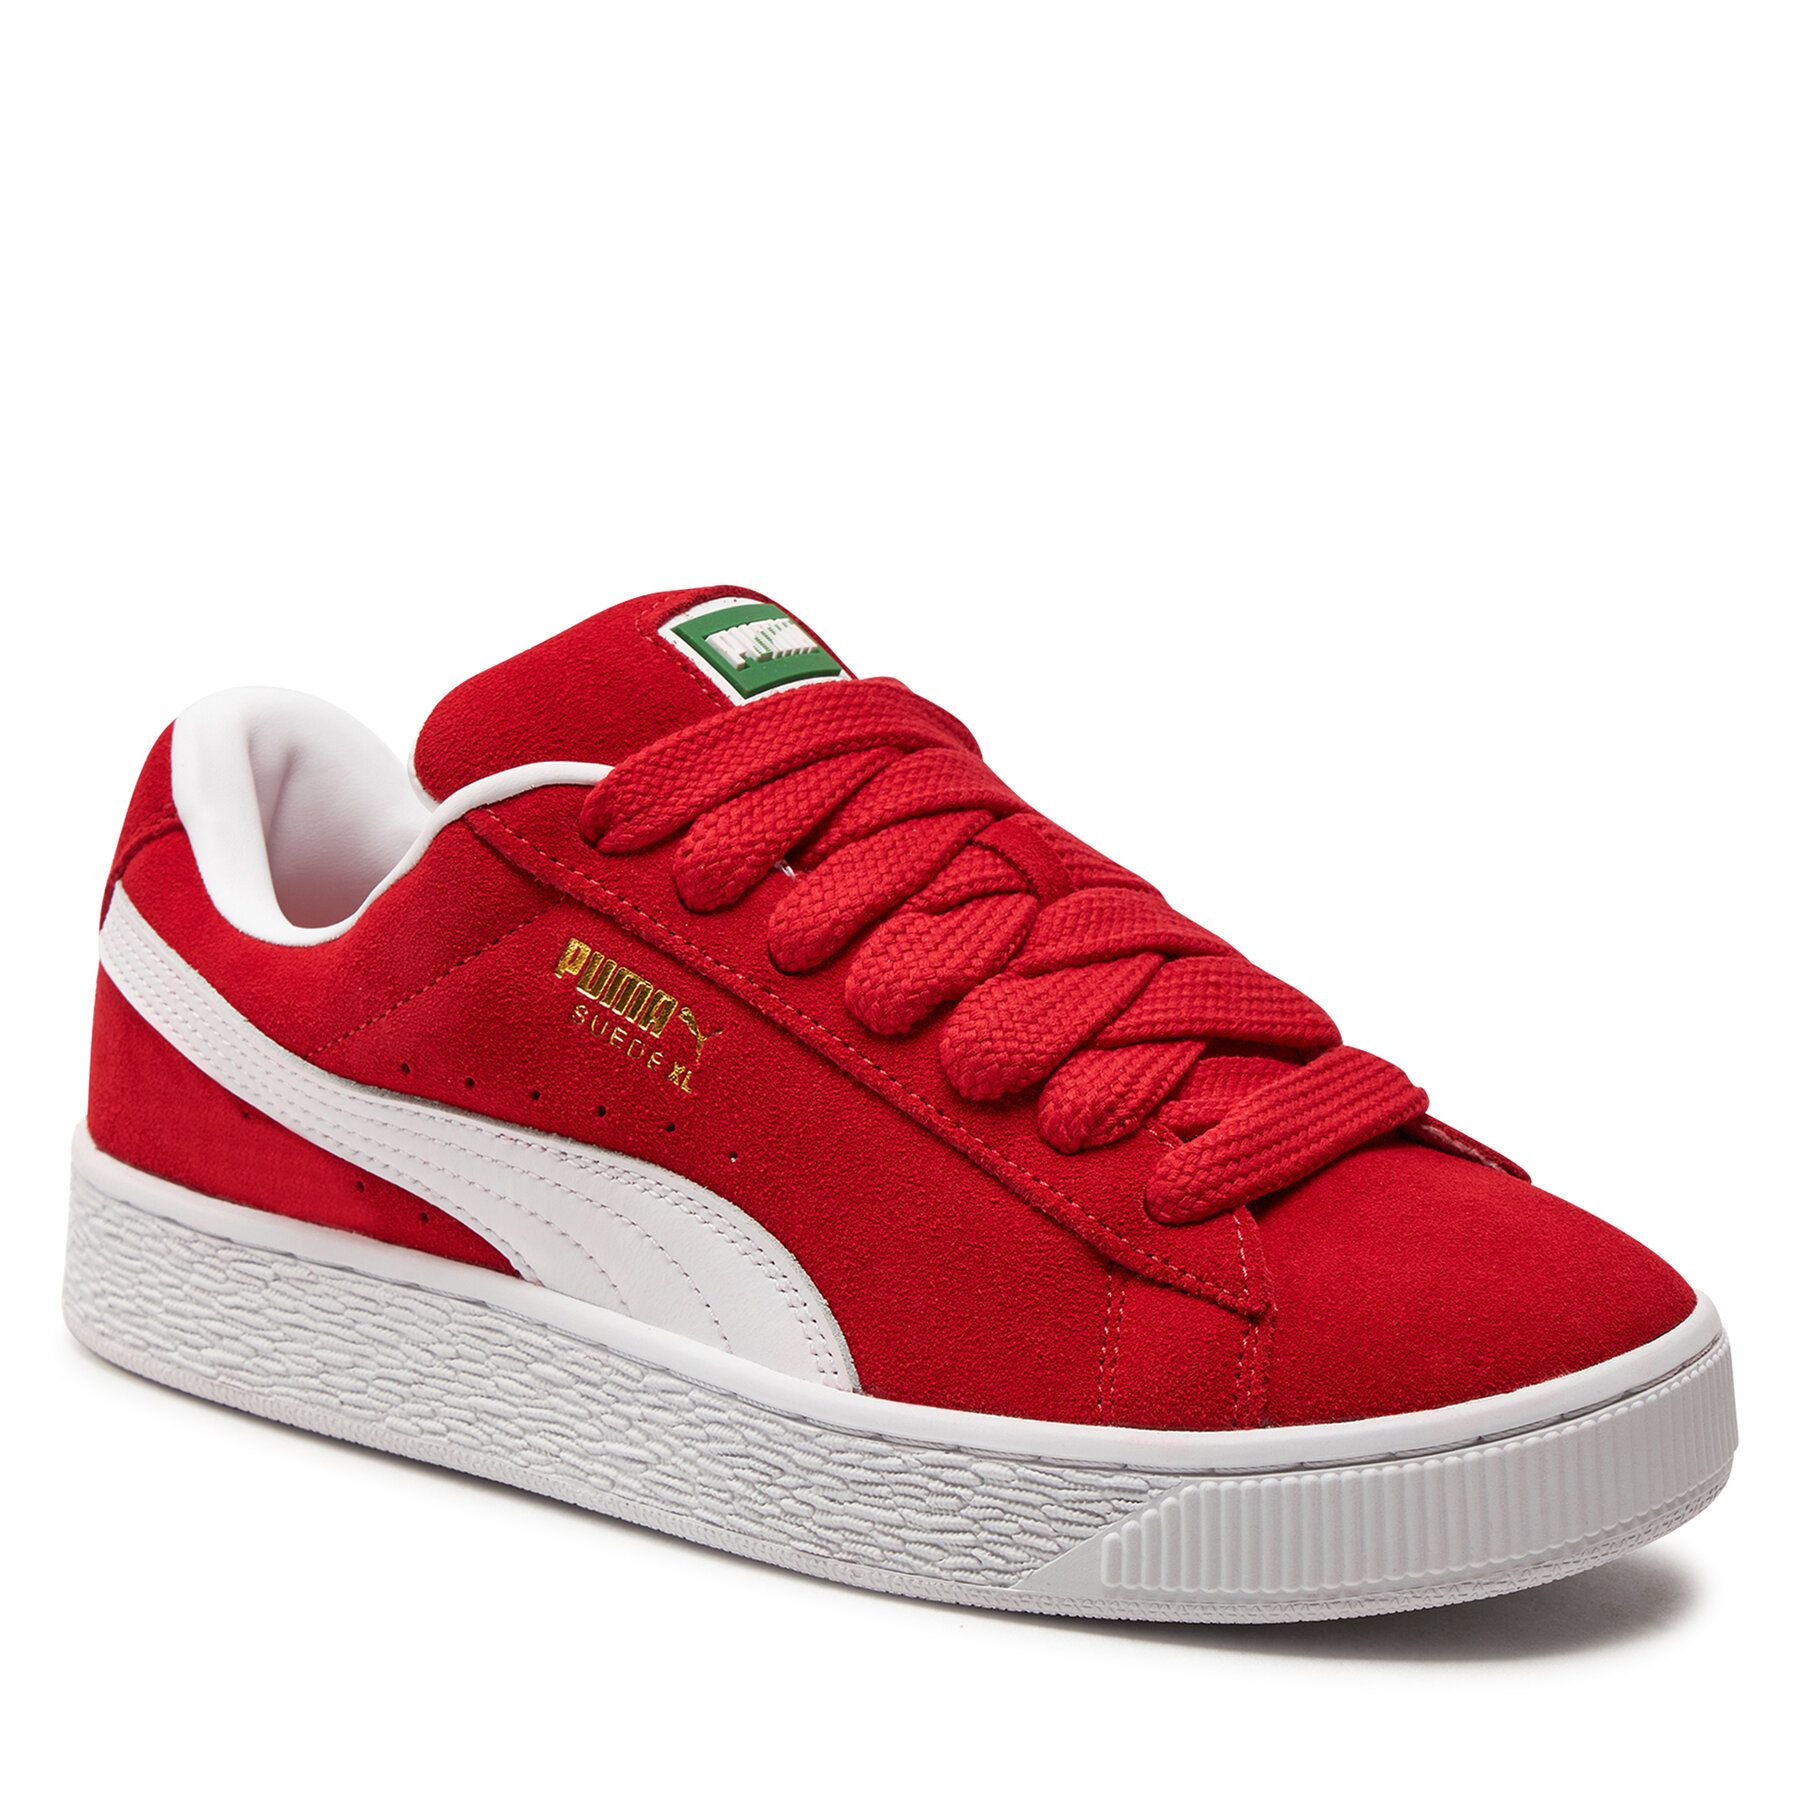 Sneakers Puma Suede Xl 395205-03 For All Time Red/Puma White